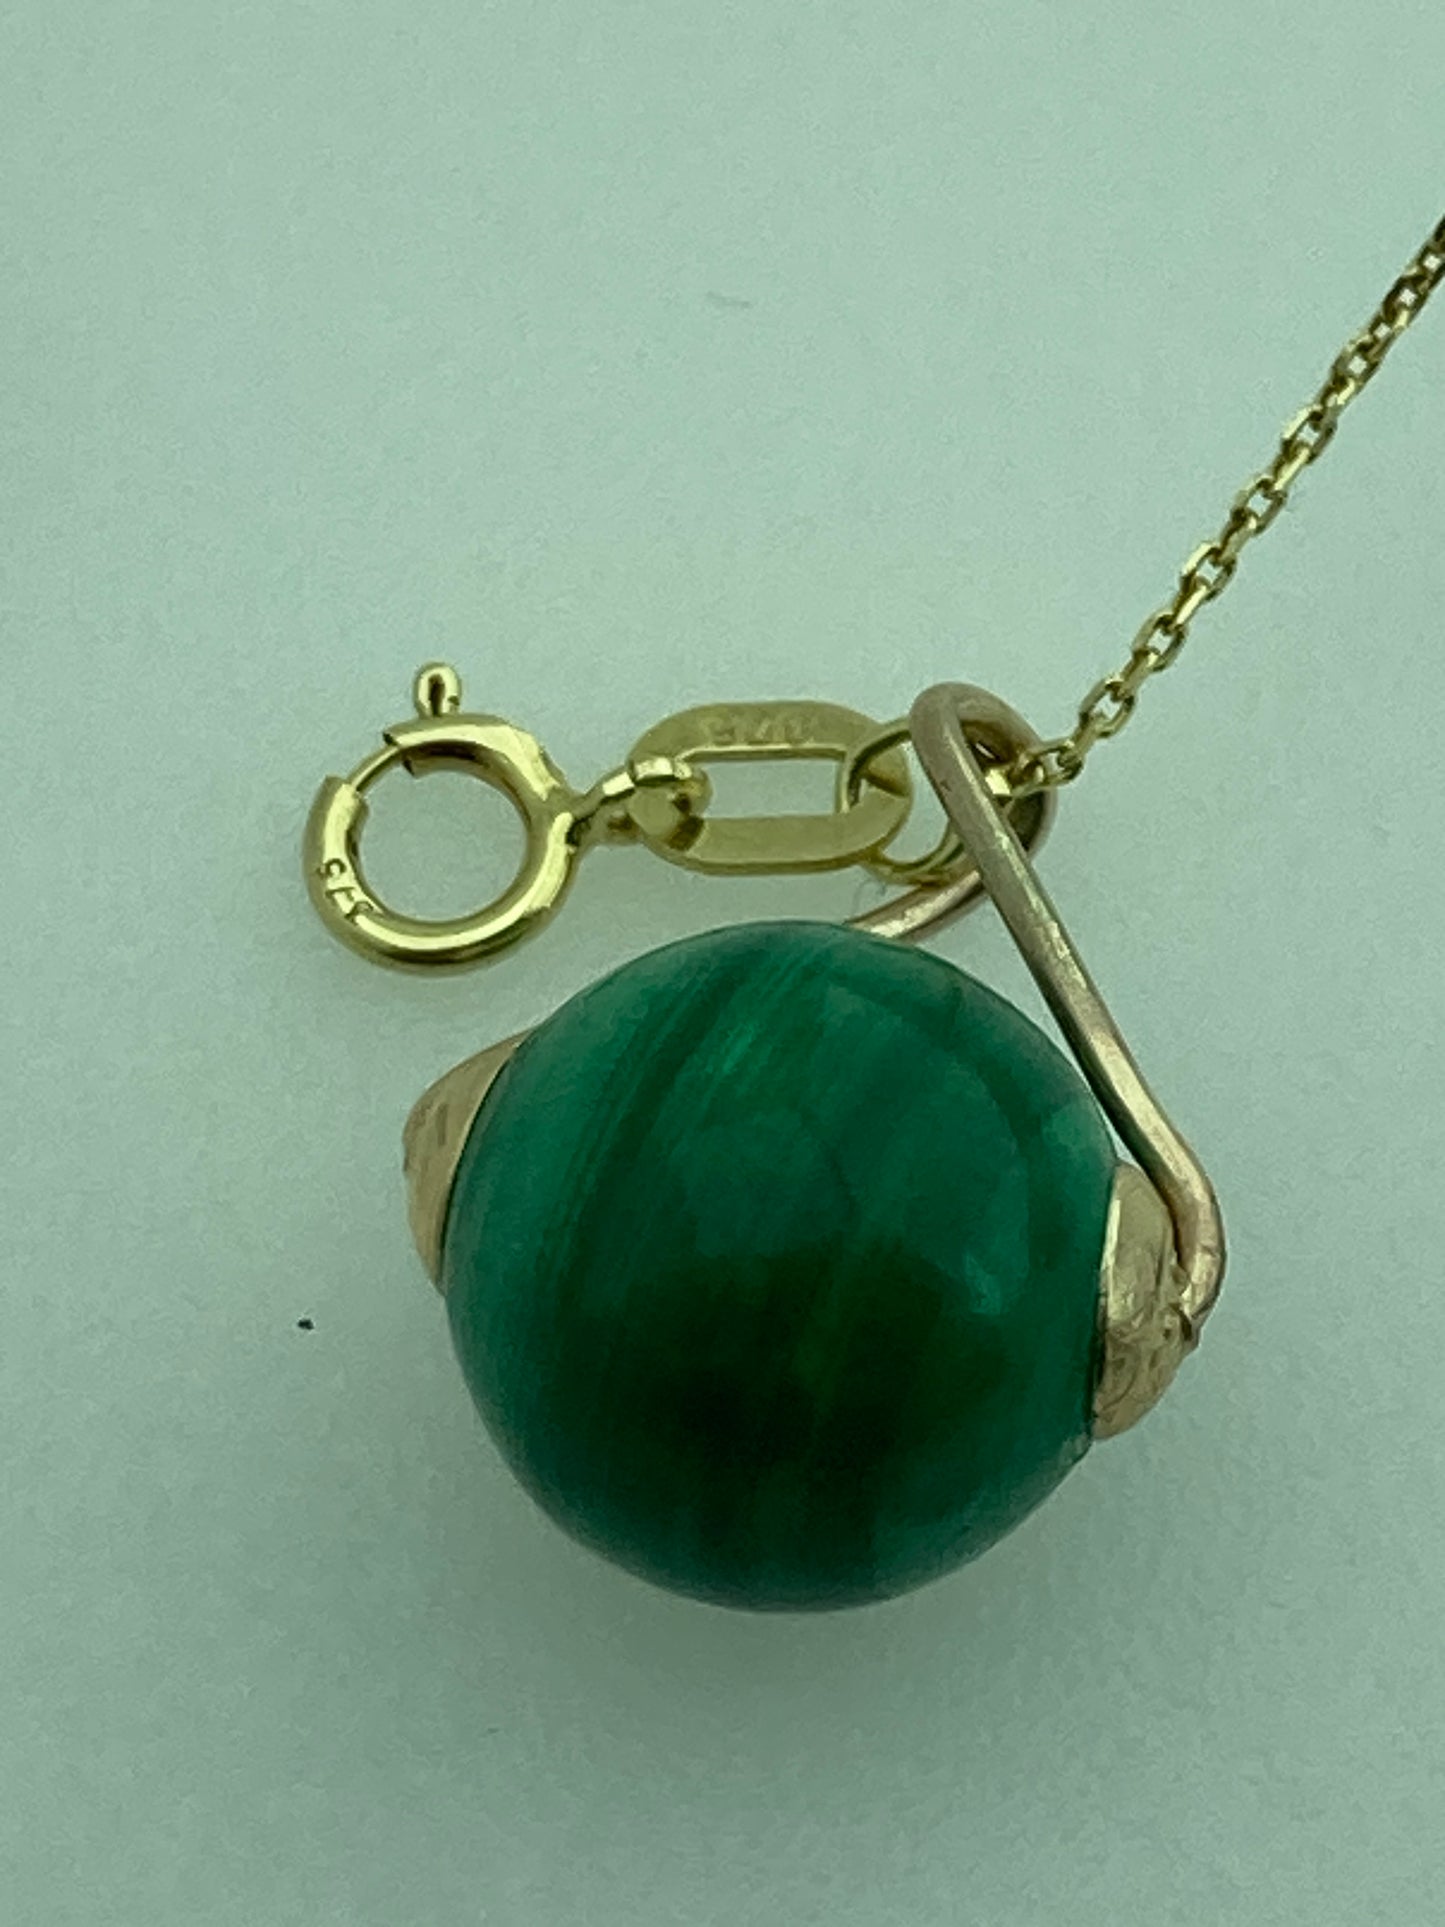 9ct gold Malachite pendant, solid 9ct yellow gold necklace, 18” gold chain